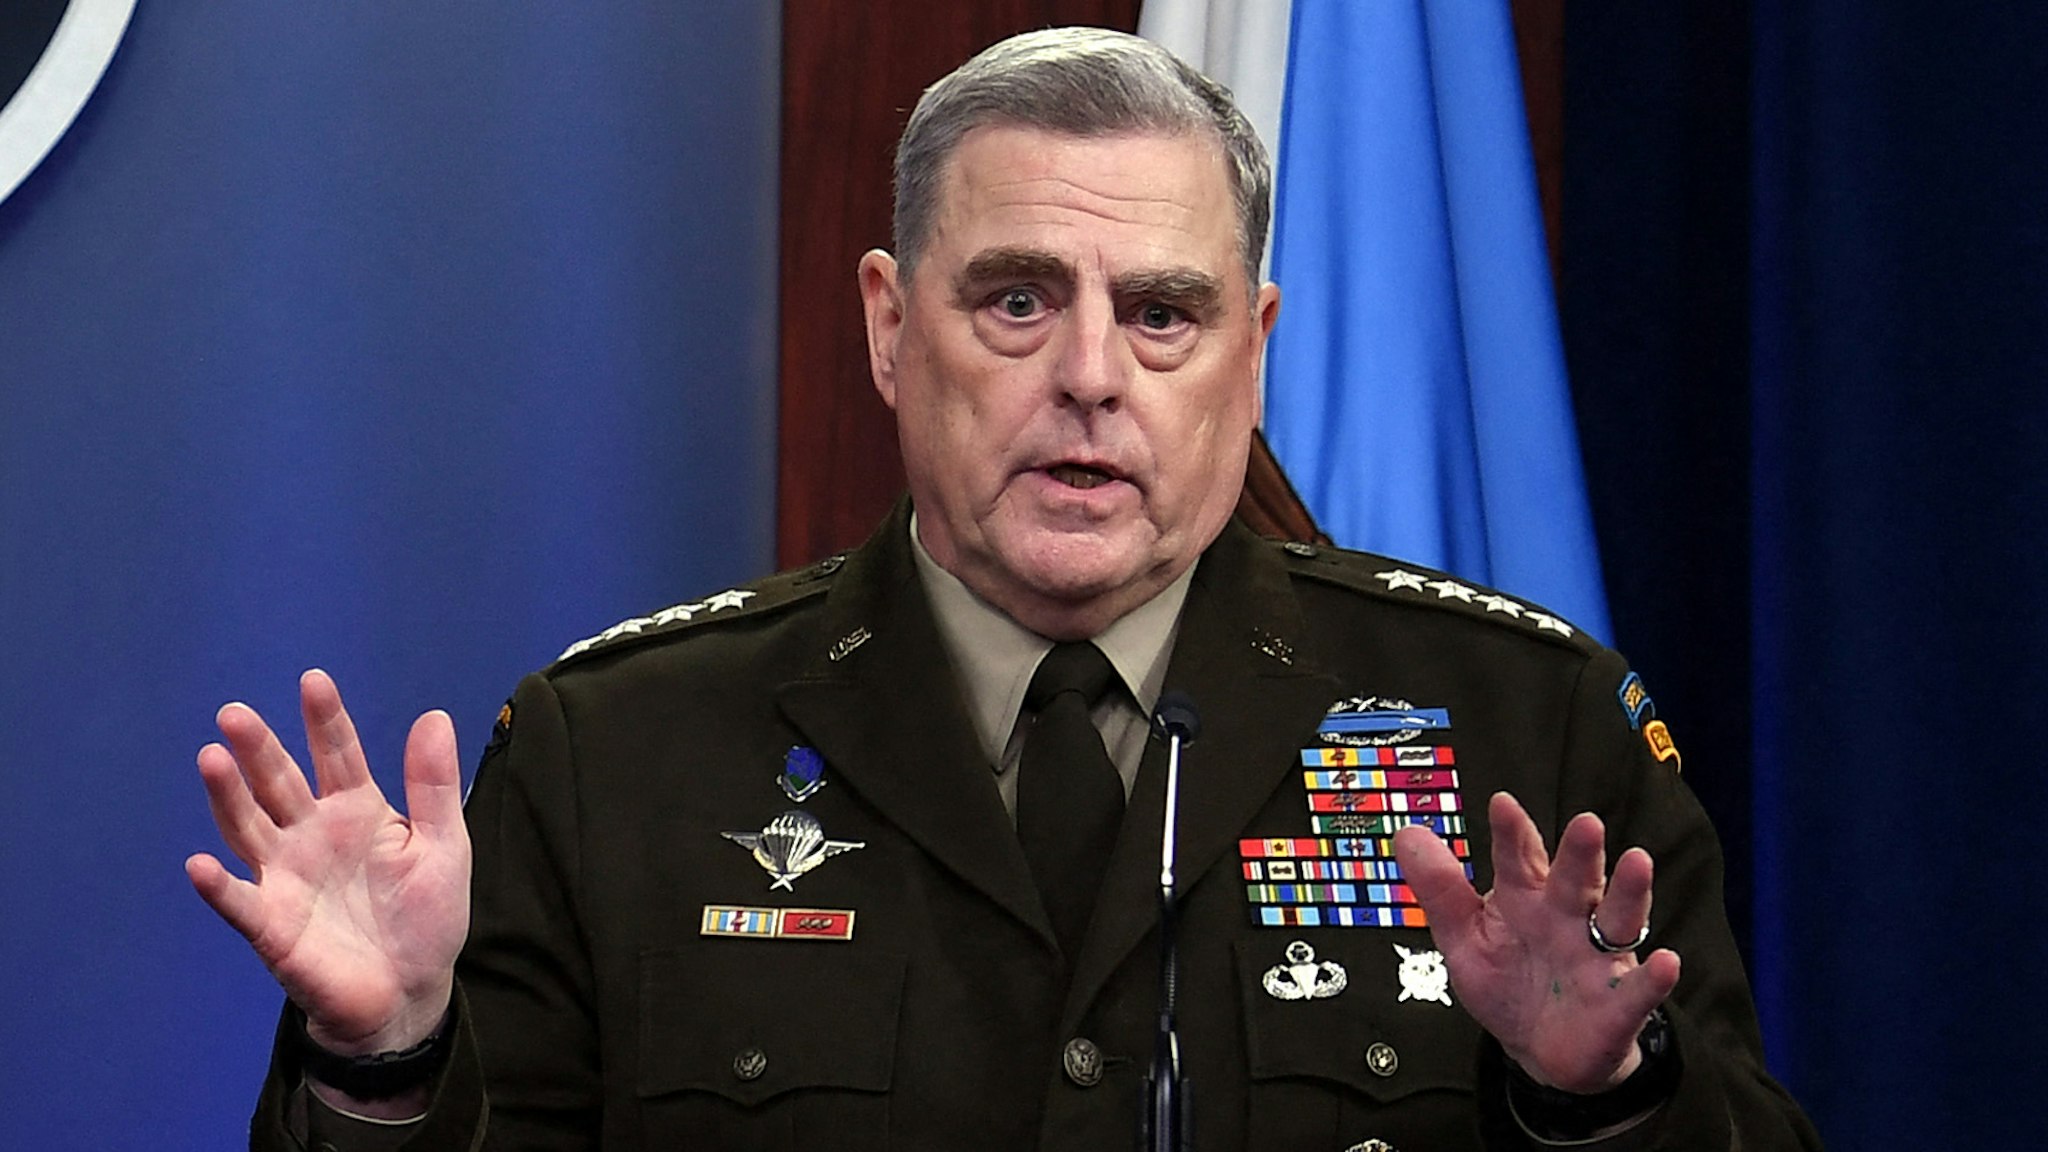 US Defense Secretary Lloyd Austin (L) and Chairman of the Joint Chiefs of Staff, General Mark Milley, hold a press conference on July 21, 2021, at The Pentagon in Washington, DC.